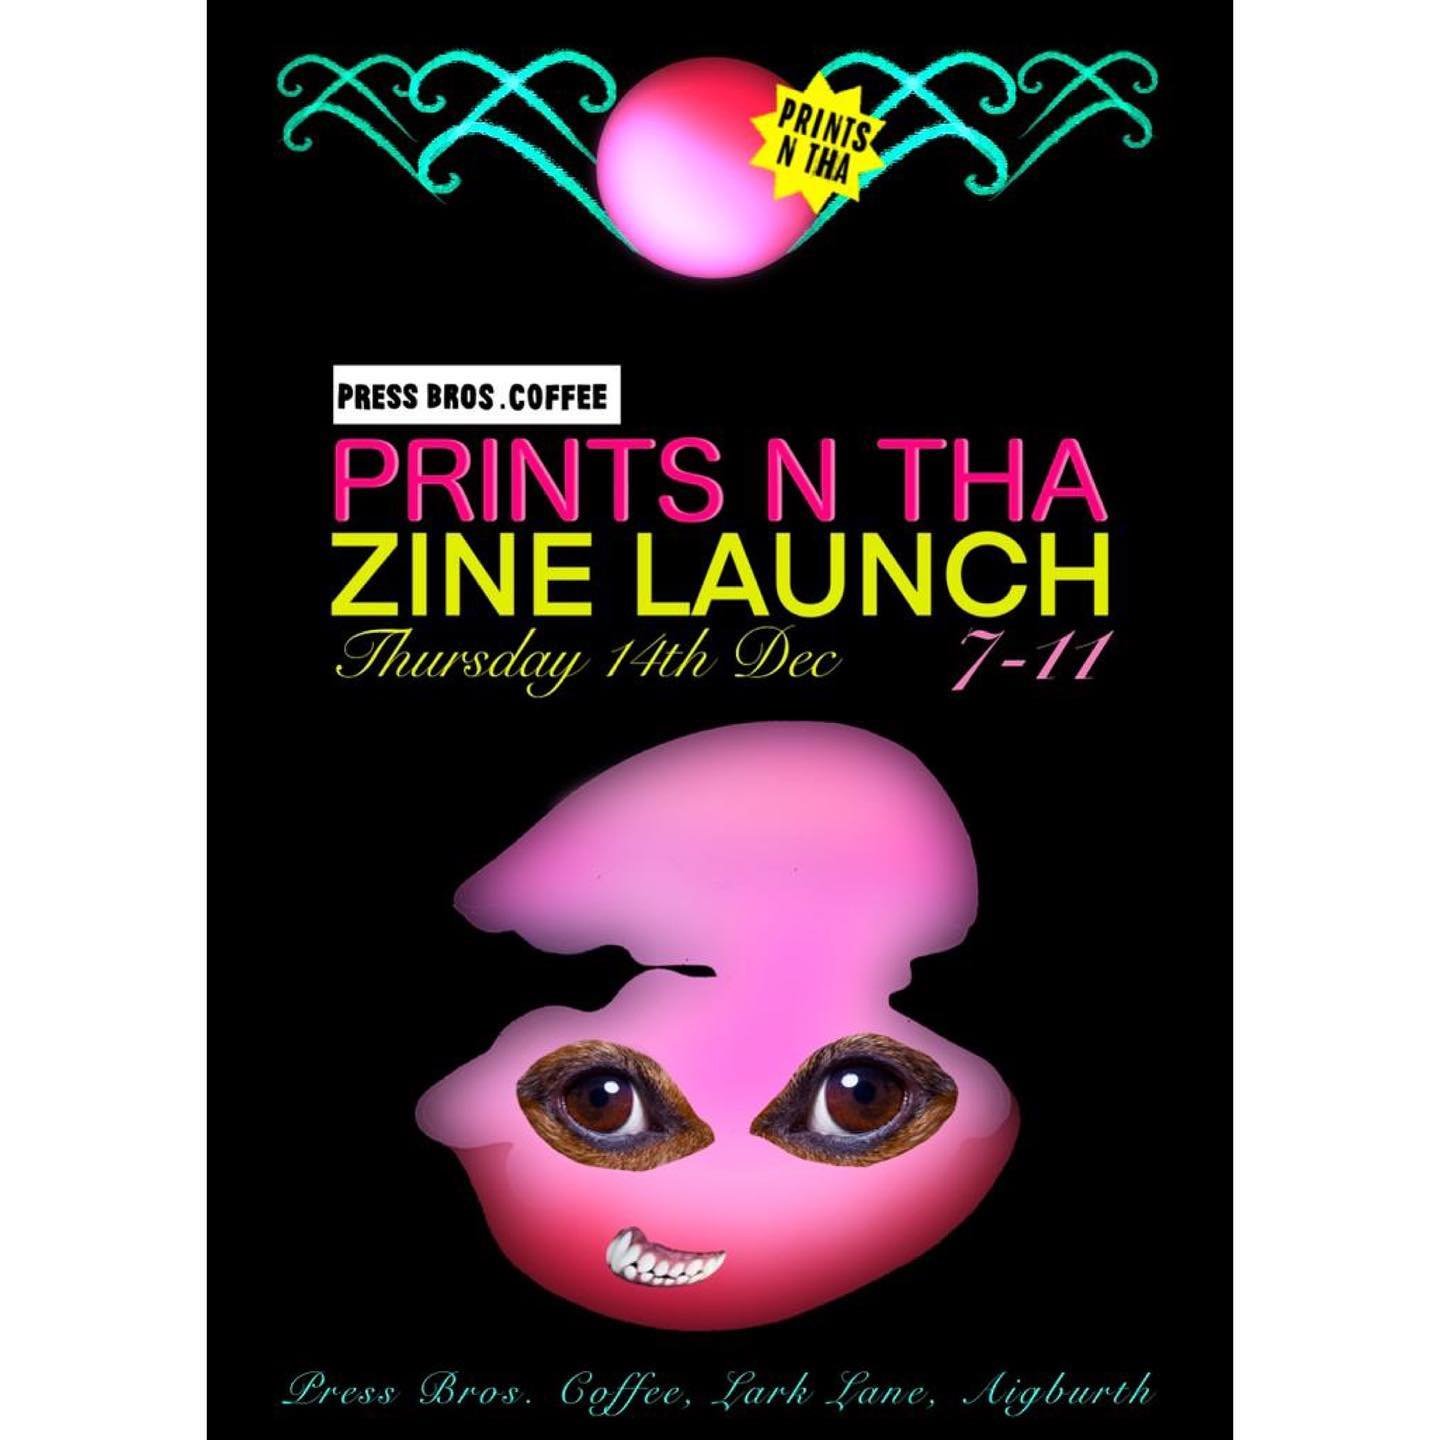 Hello everyone&hellip; we&lsquo;re very pleased to announce our official &lsquo;Zines n Tha&rsquo; issues I &amp; II neon zine launch party is happening on THURS 14th DEC 7-11pm @pressbroscoffee on Lark Lane 🤠💖

Do come along for zines, coffee, coc